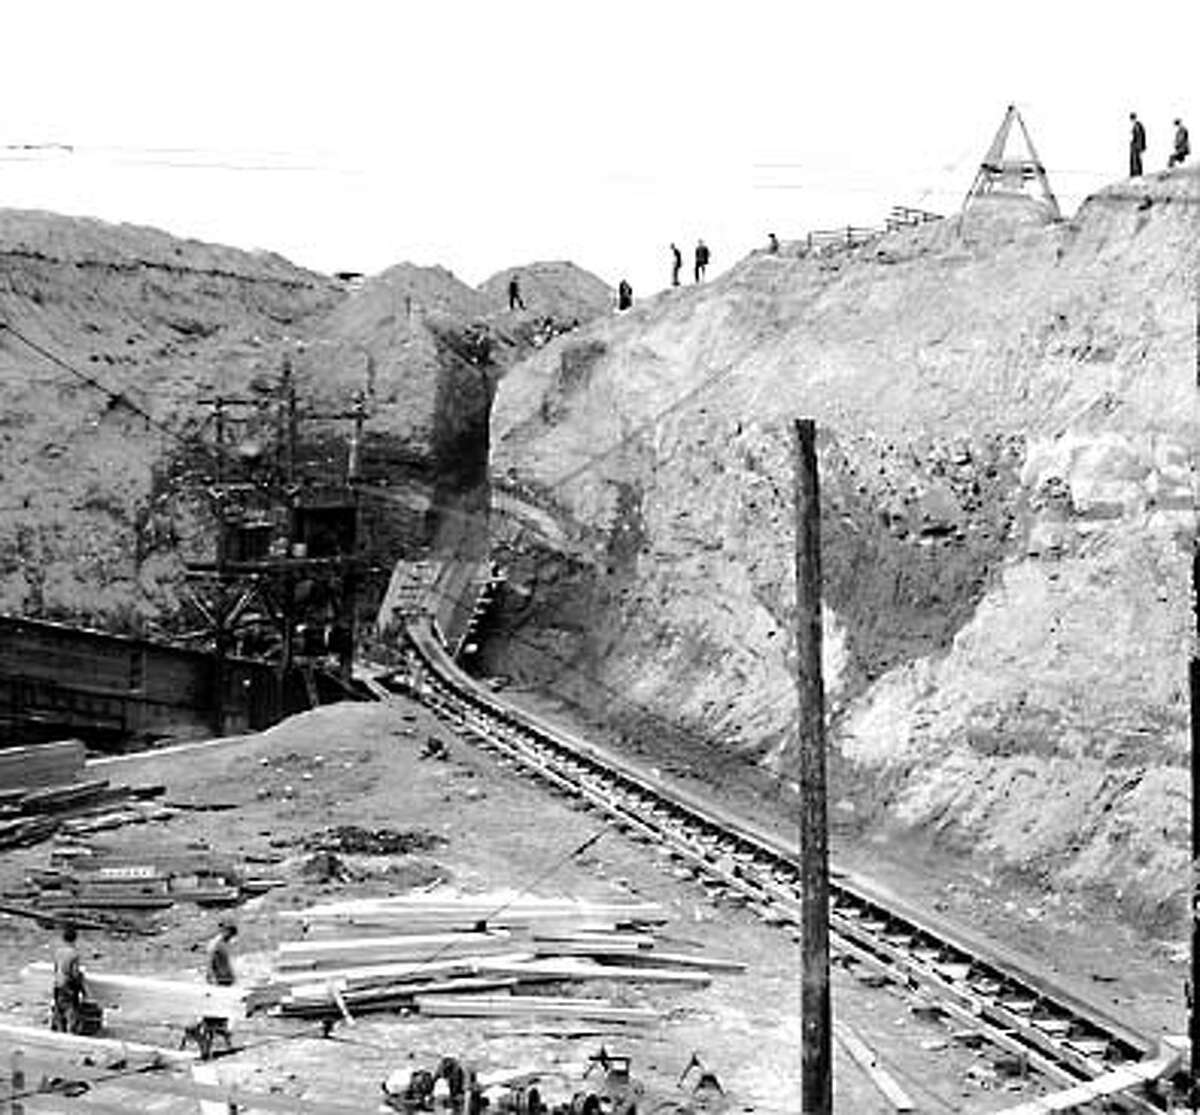 At the time, the Seattle Post-Intelligencer referred to the regrade as "one of the great engineering projects of the West." Steam shovels and water sluices ate away at the hillside and conveyor belts carried the dirt to the waterfront for disposal.